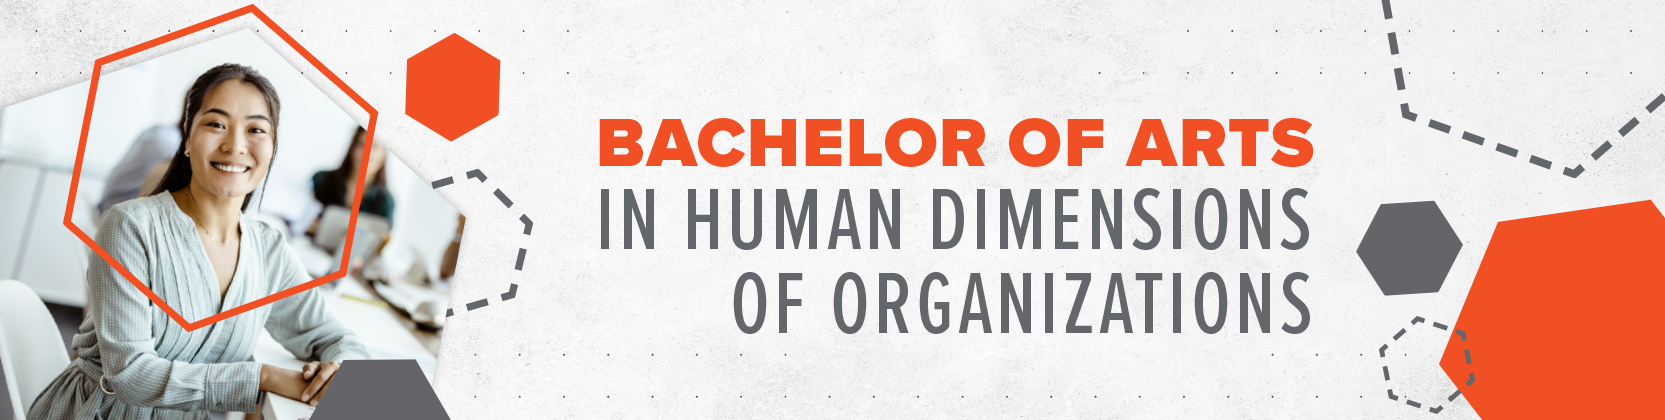 Bachelor of Arts in Human Dimensions of Organizations Page Banner 